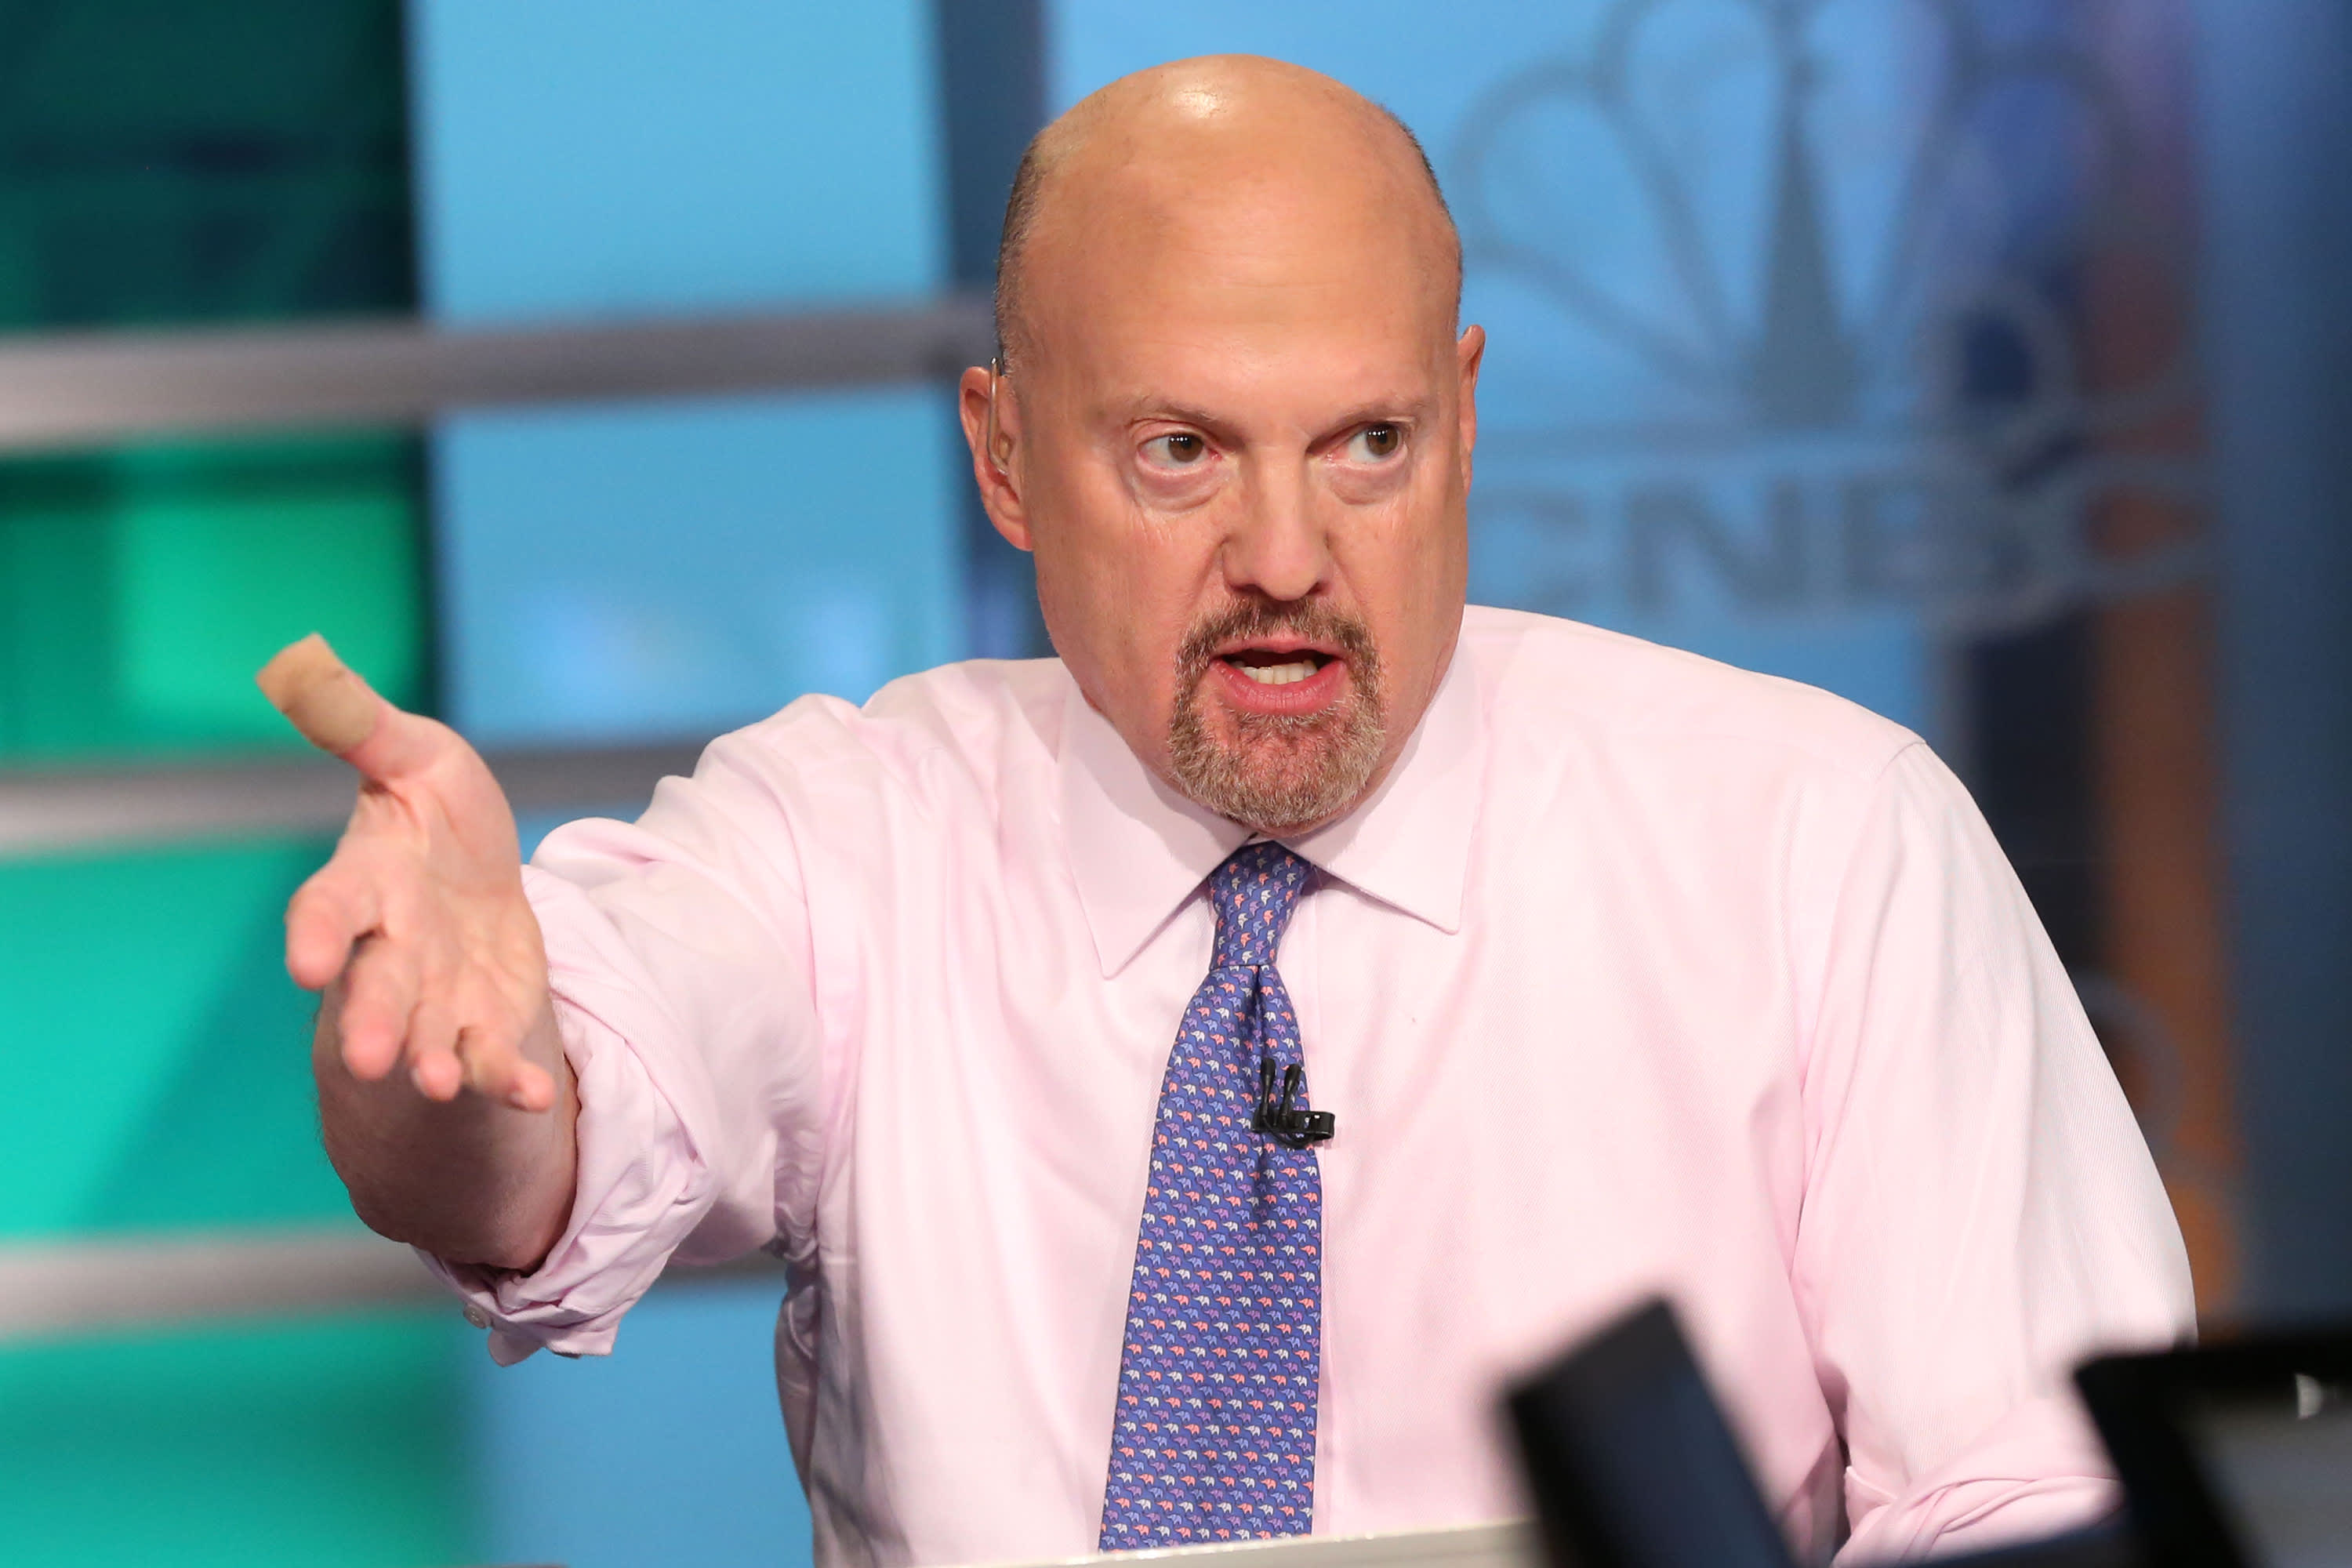 Jim Cramer's investment club meeting Friday: Inflation data, Salesforce, Microsoft trouble